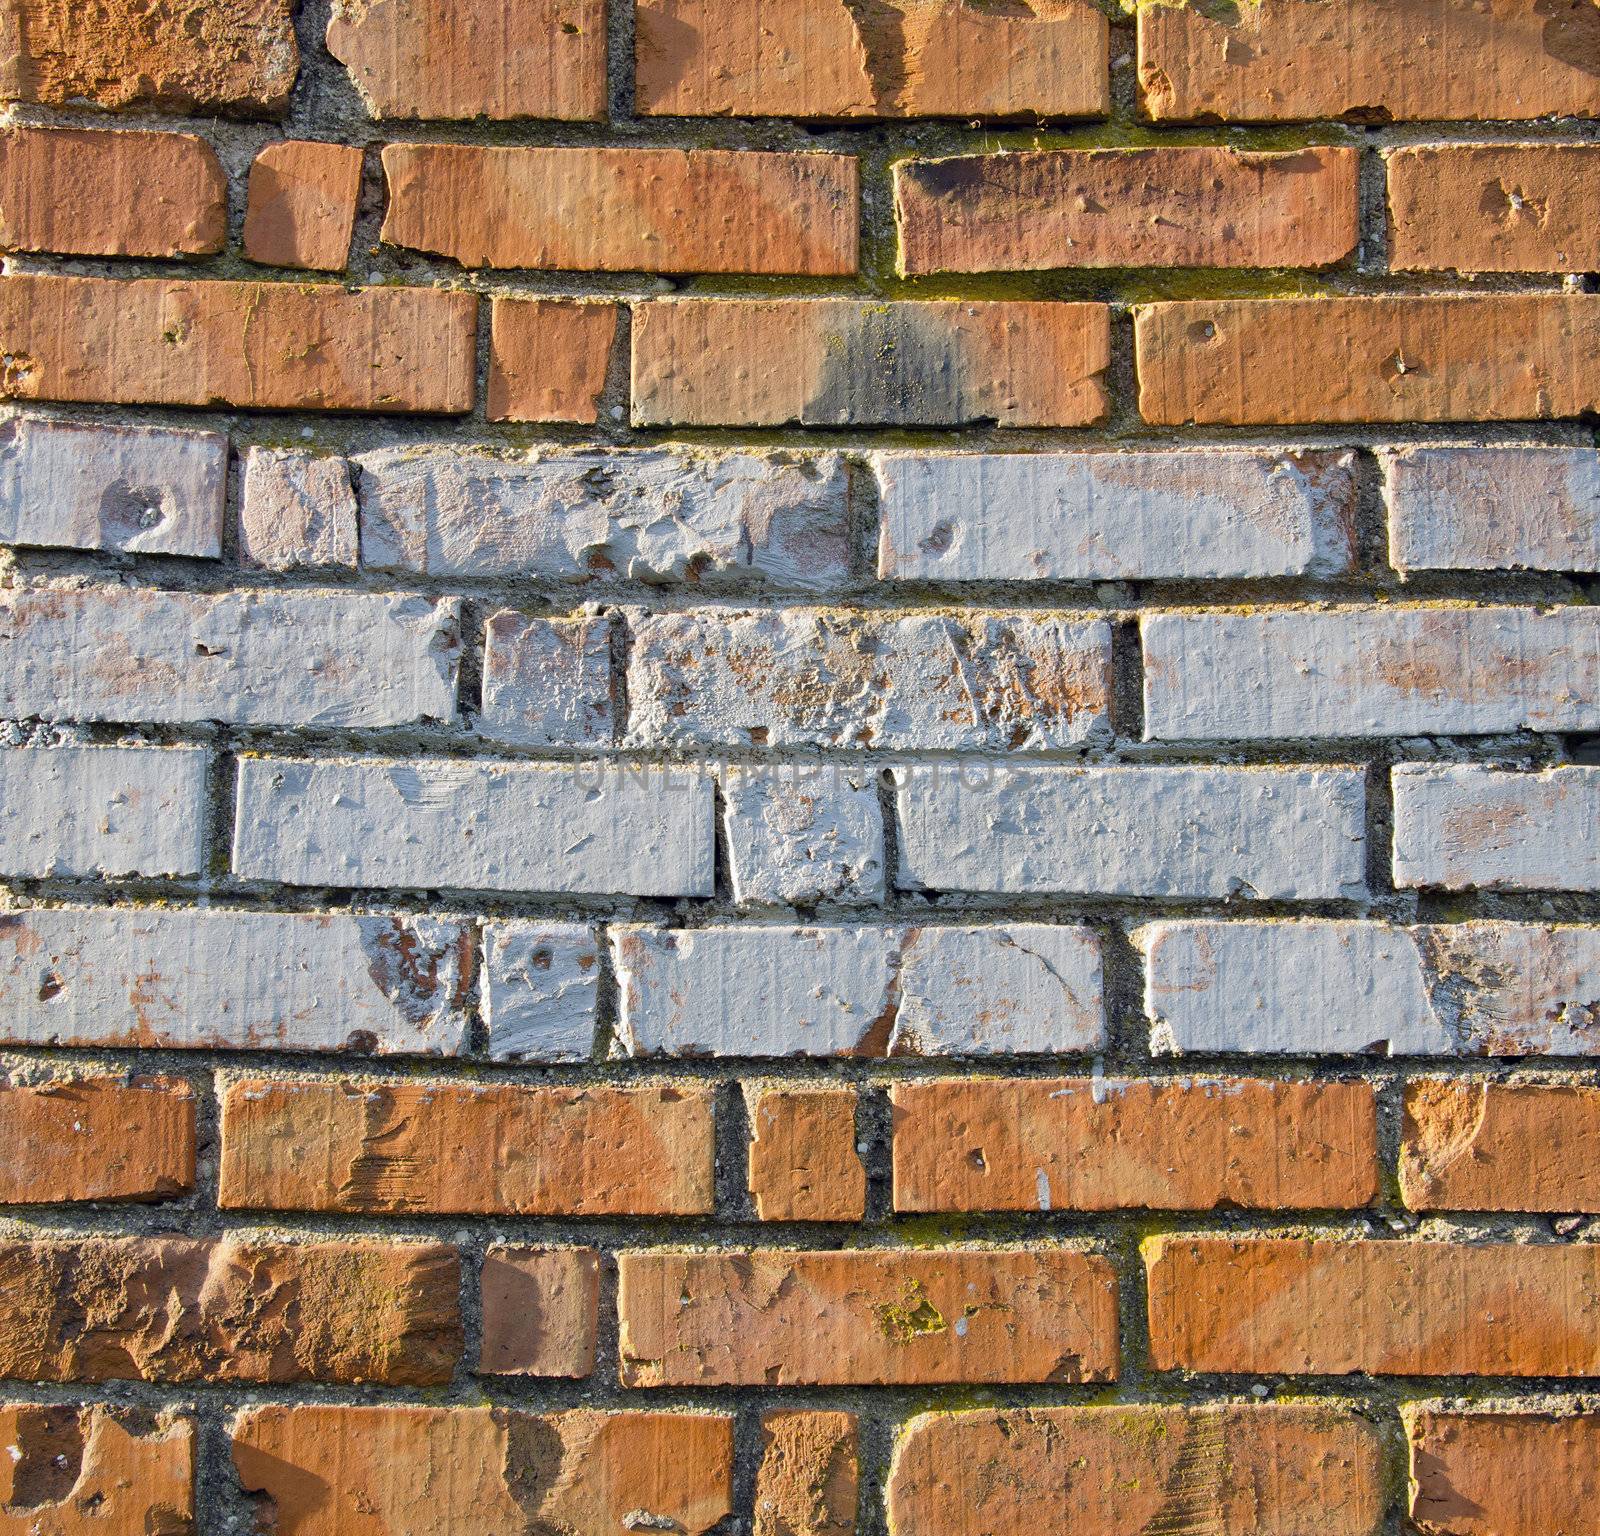 Red brick wall background. by sauletas